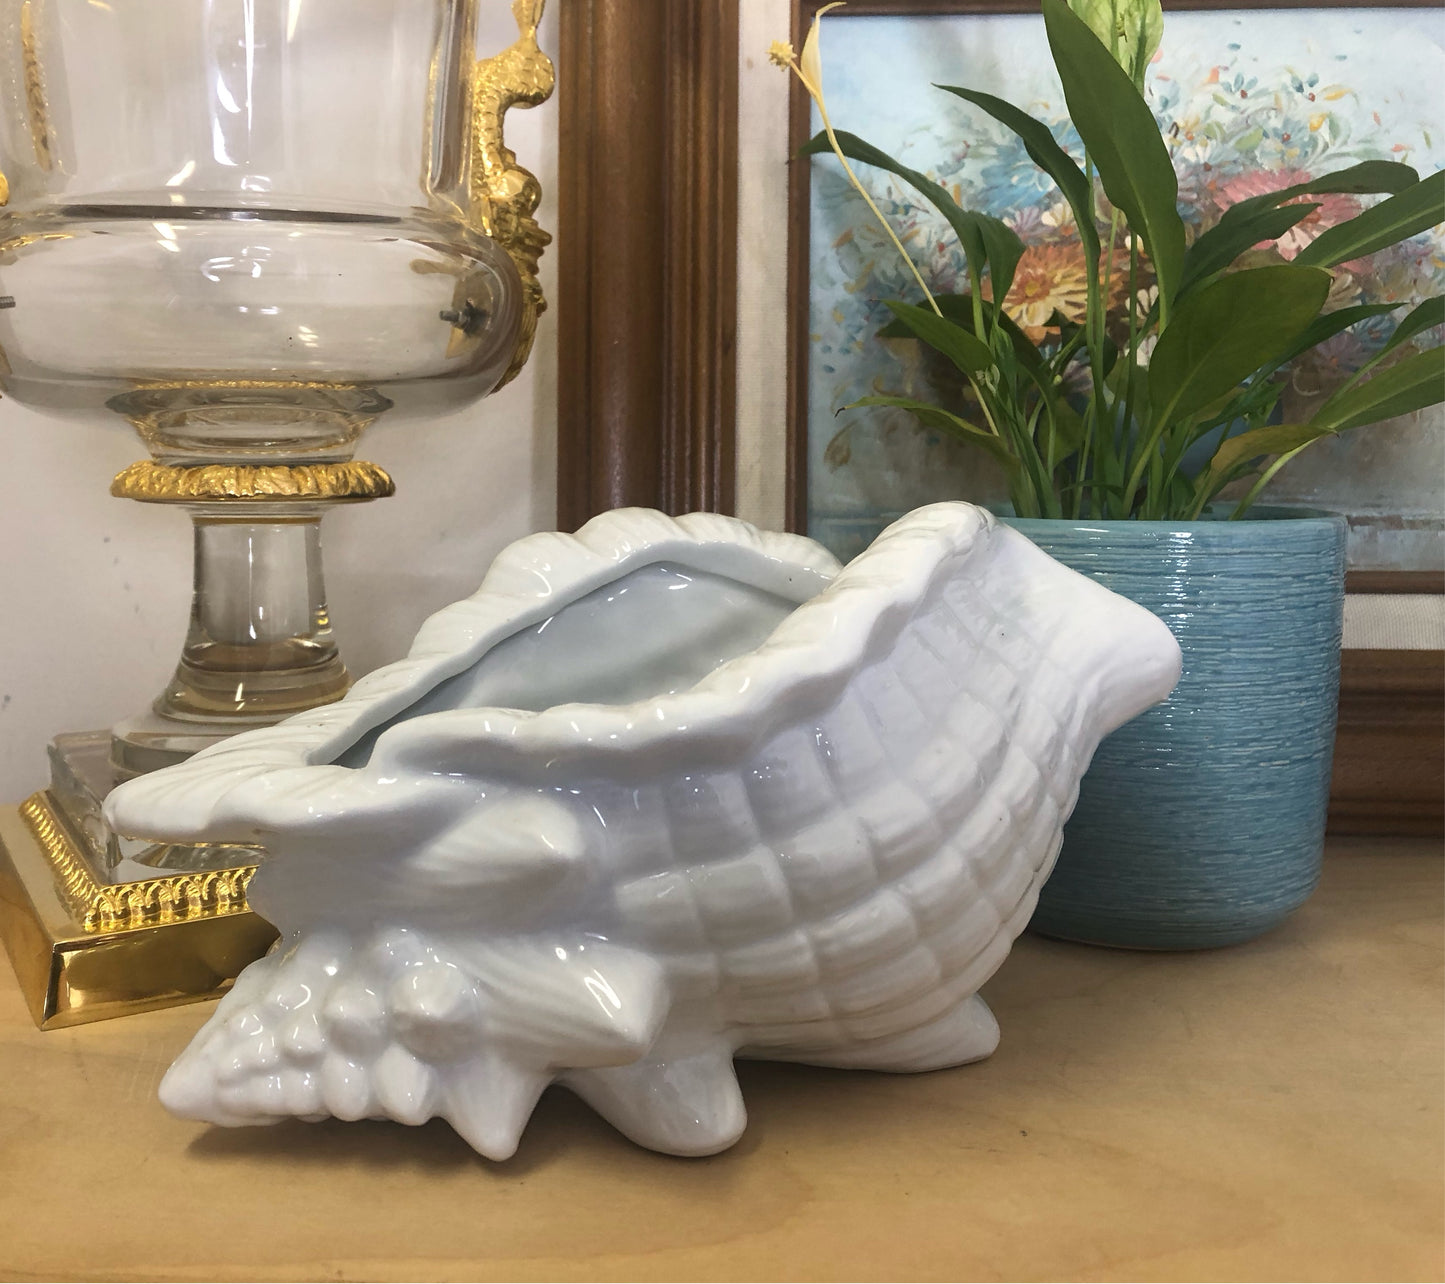 Vintage conch shell planter - Excellent condition!